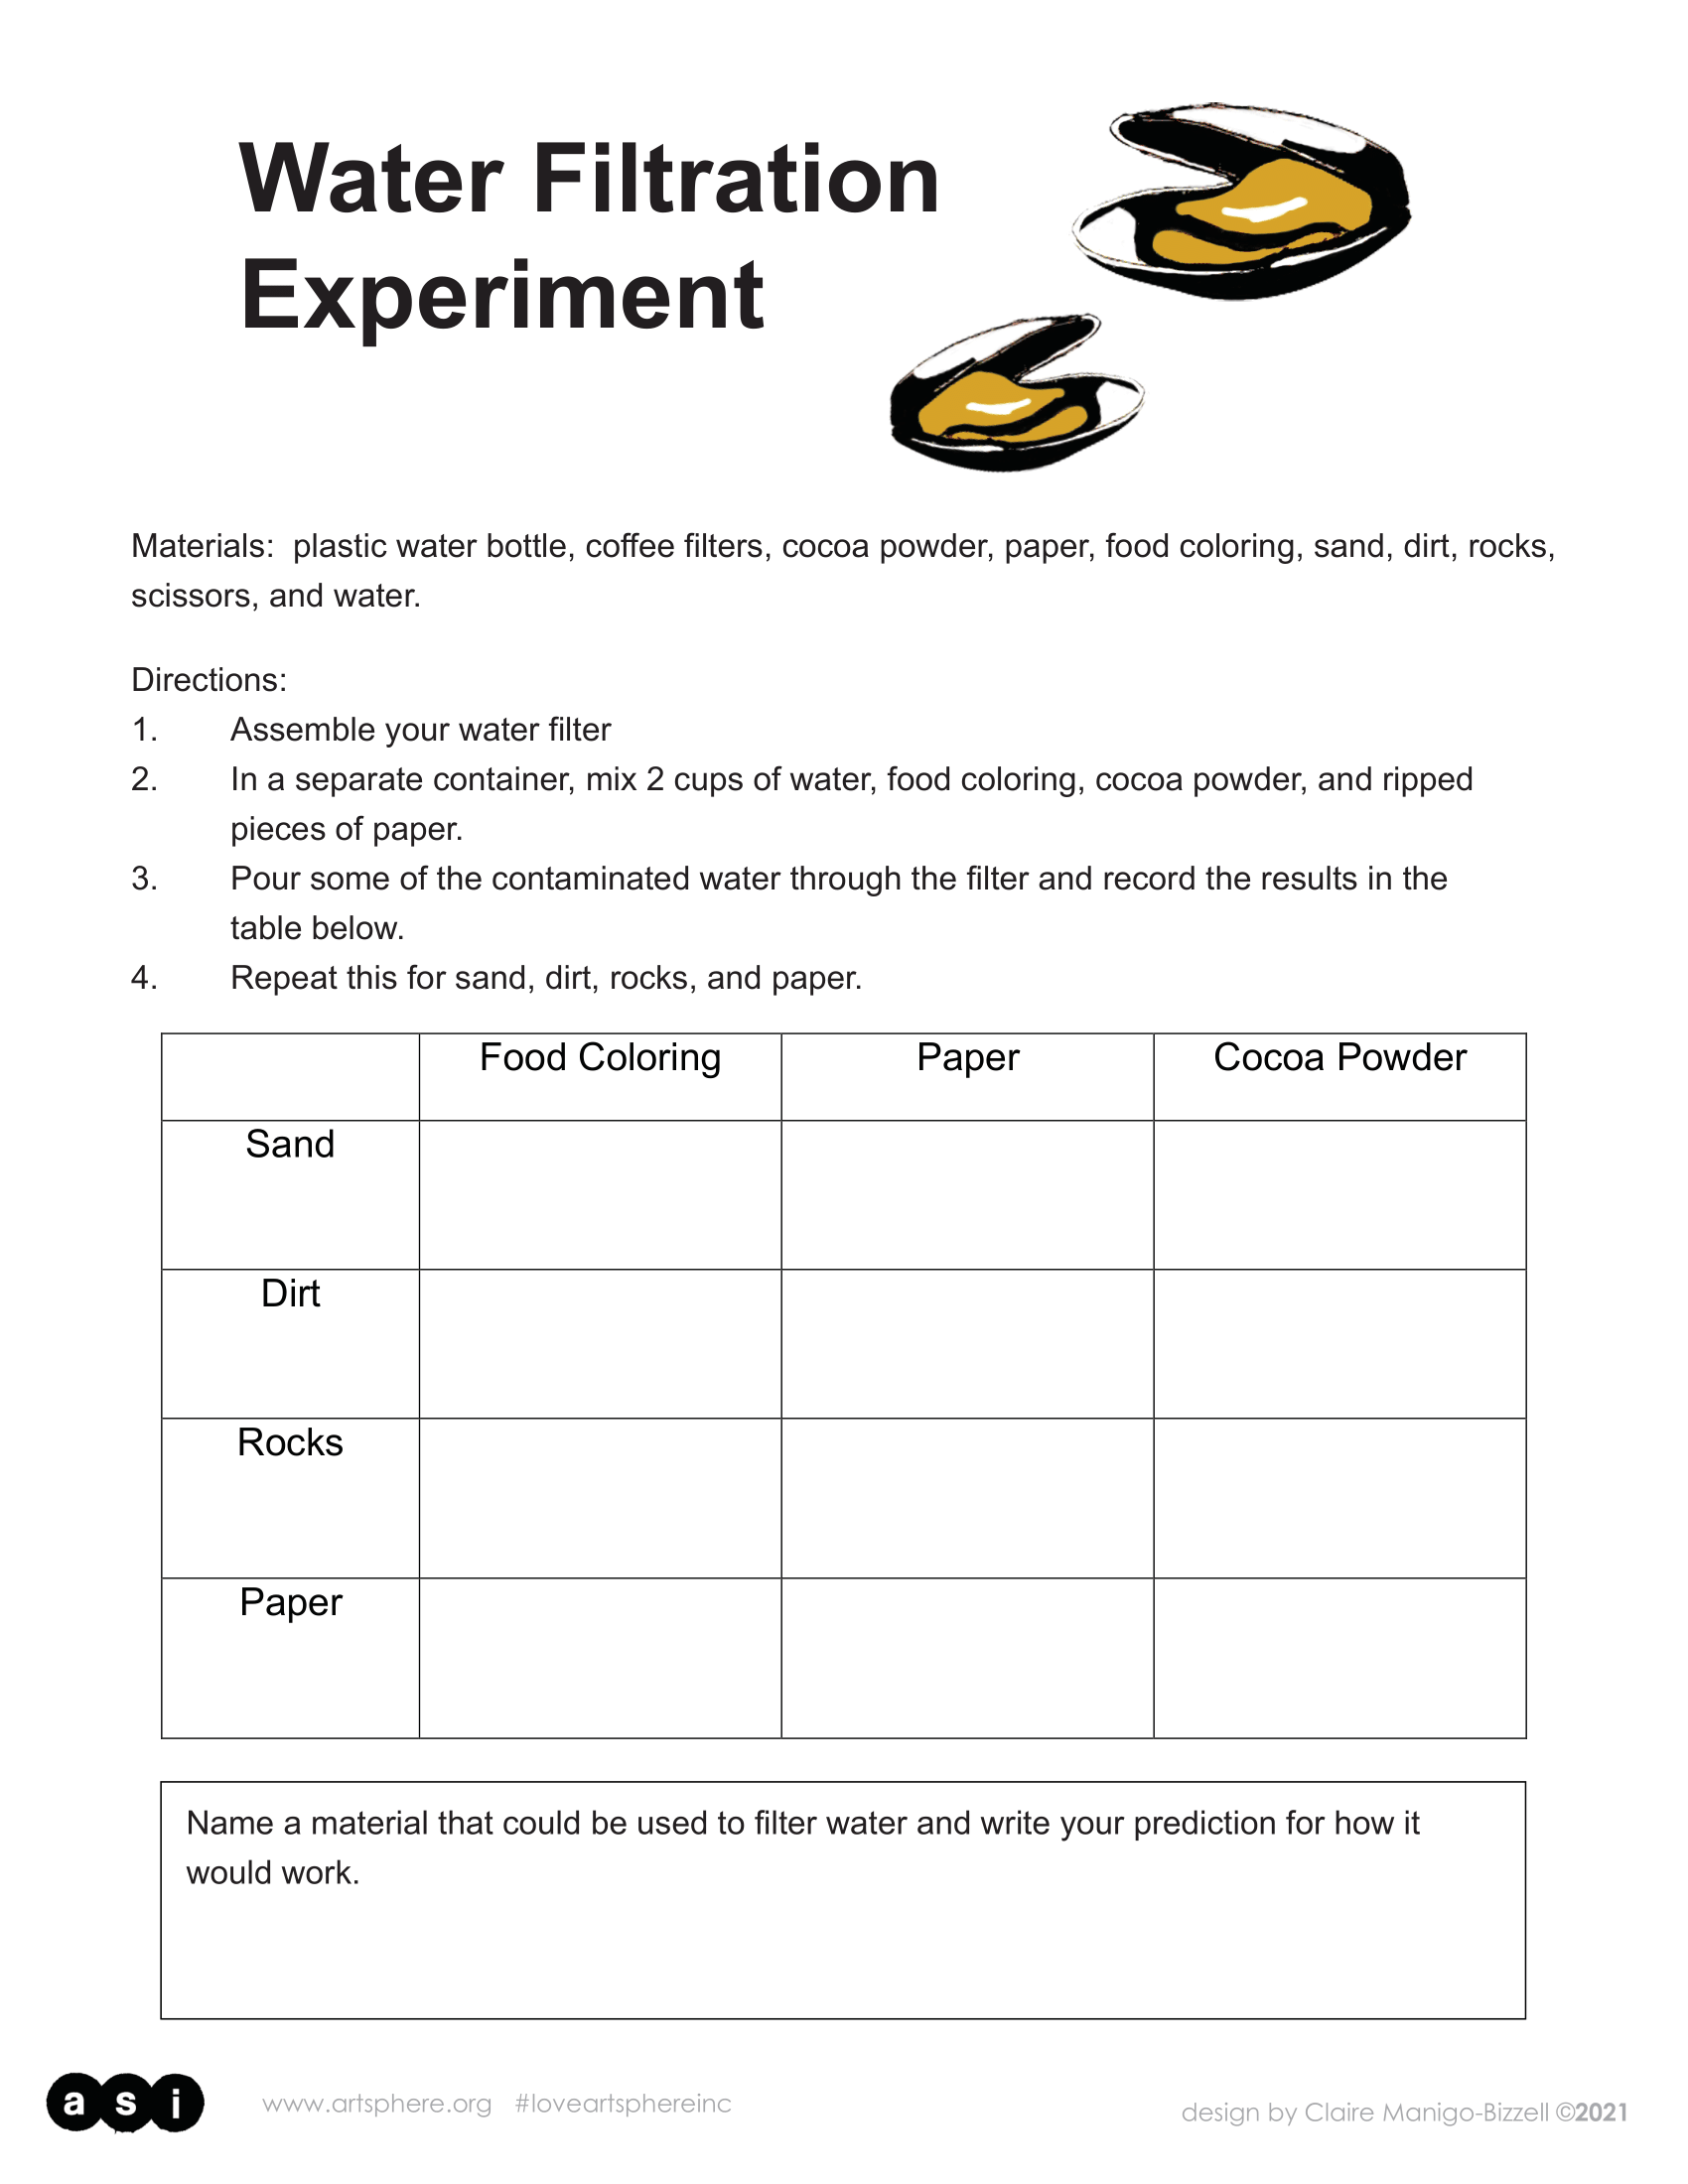 hypothesis of water filtration experiment